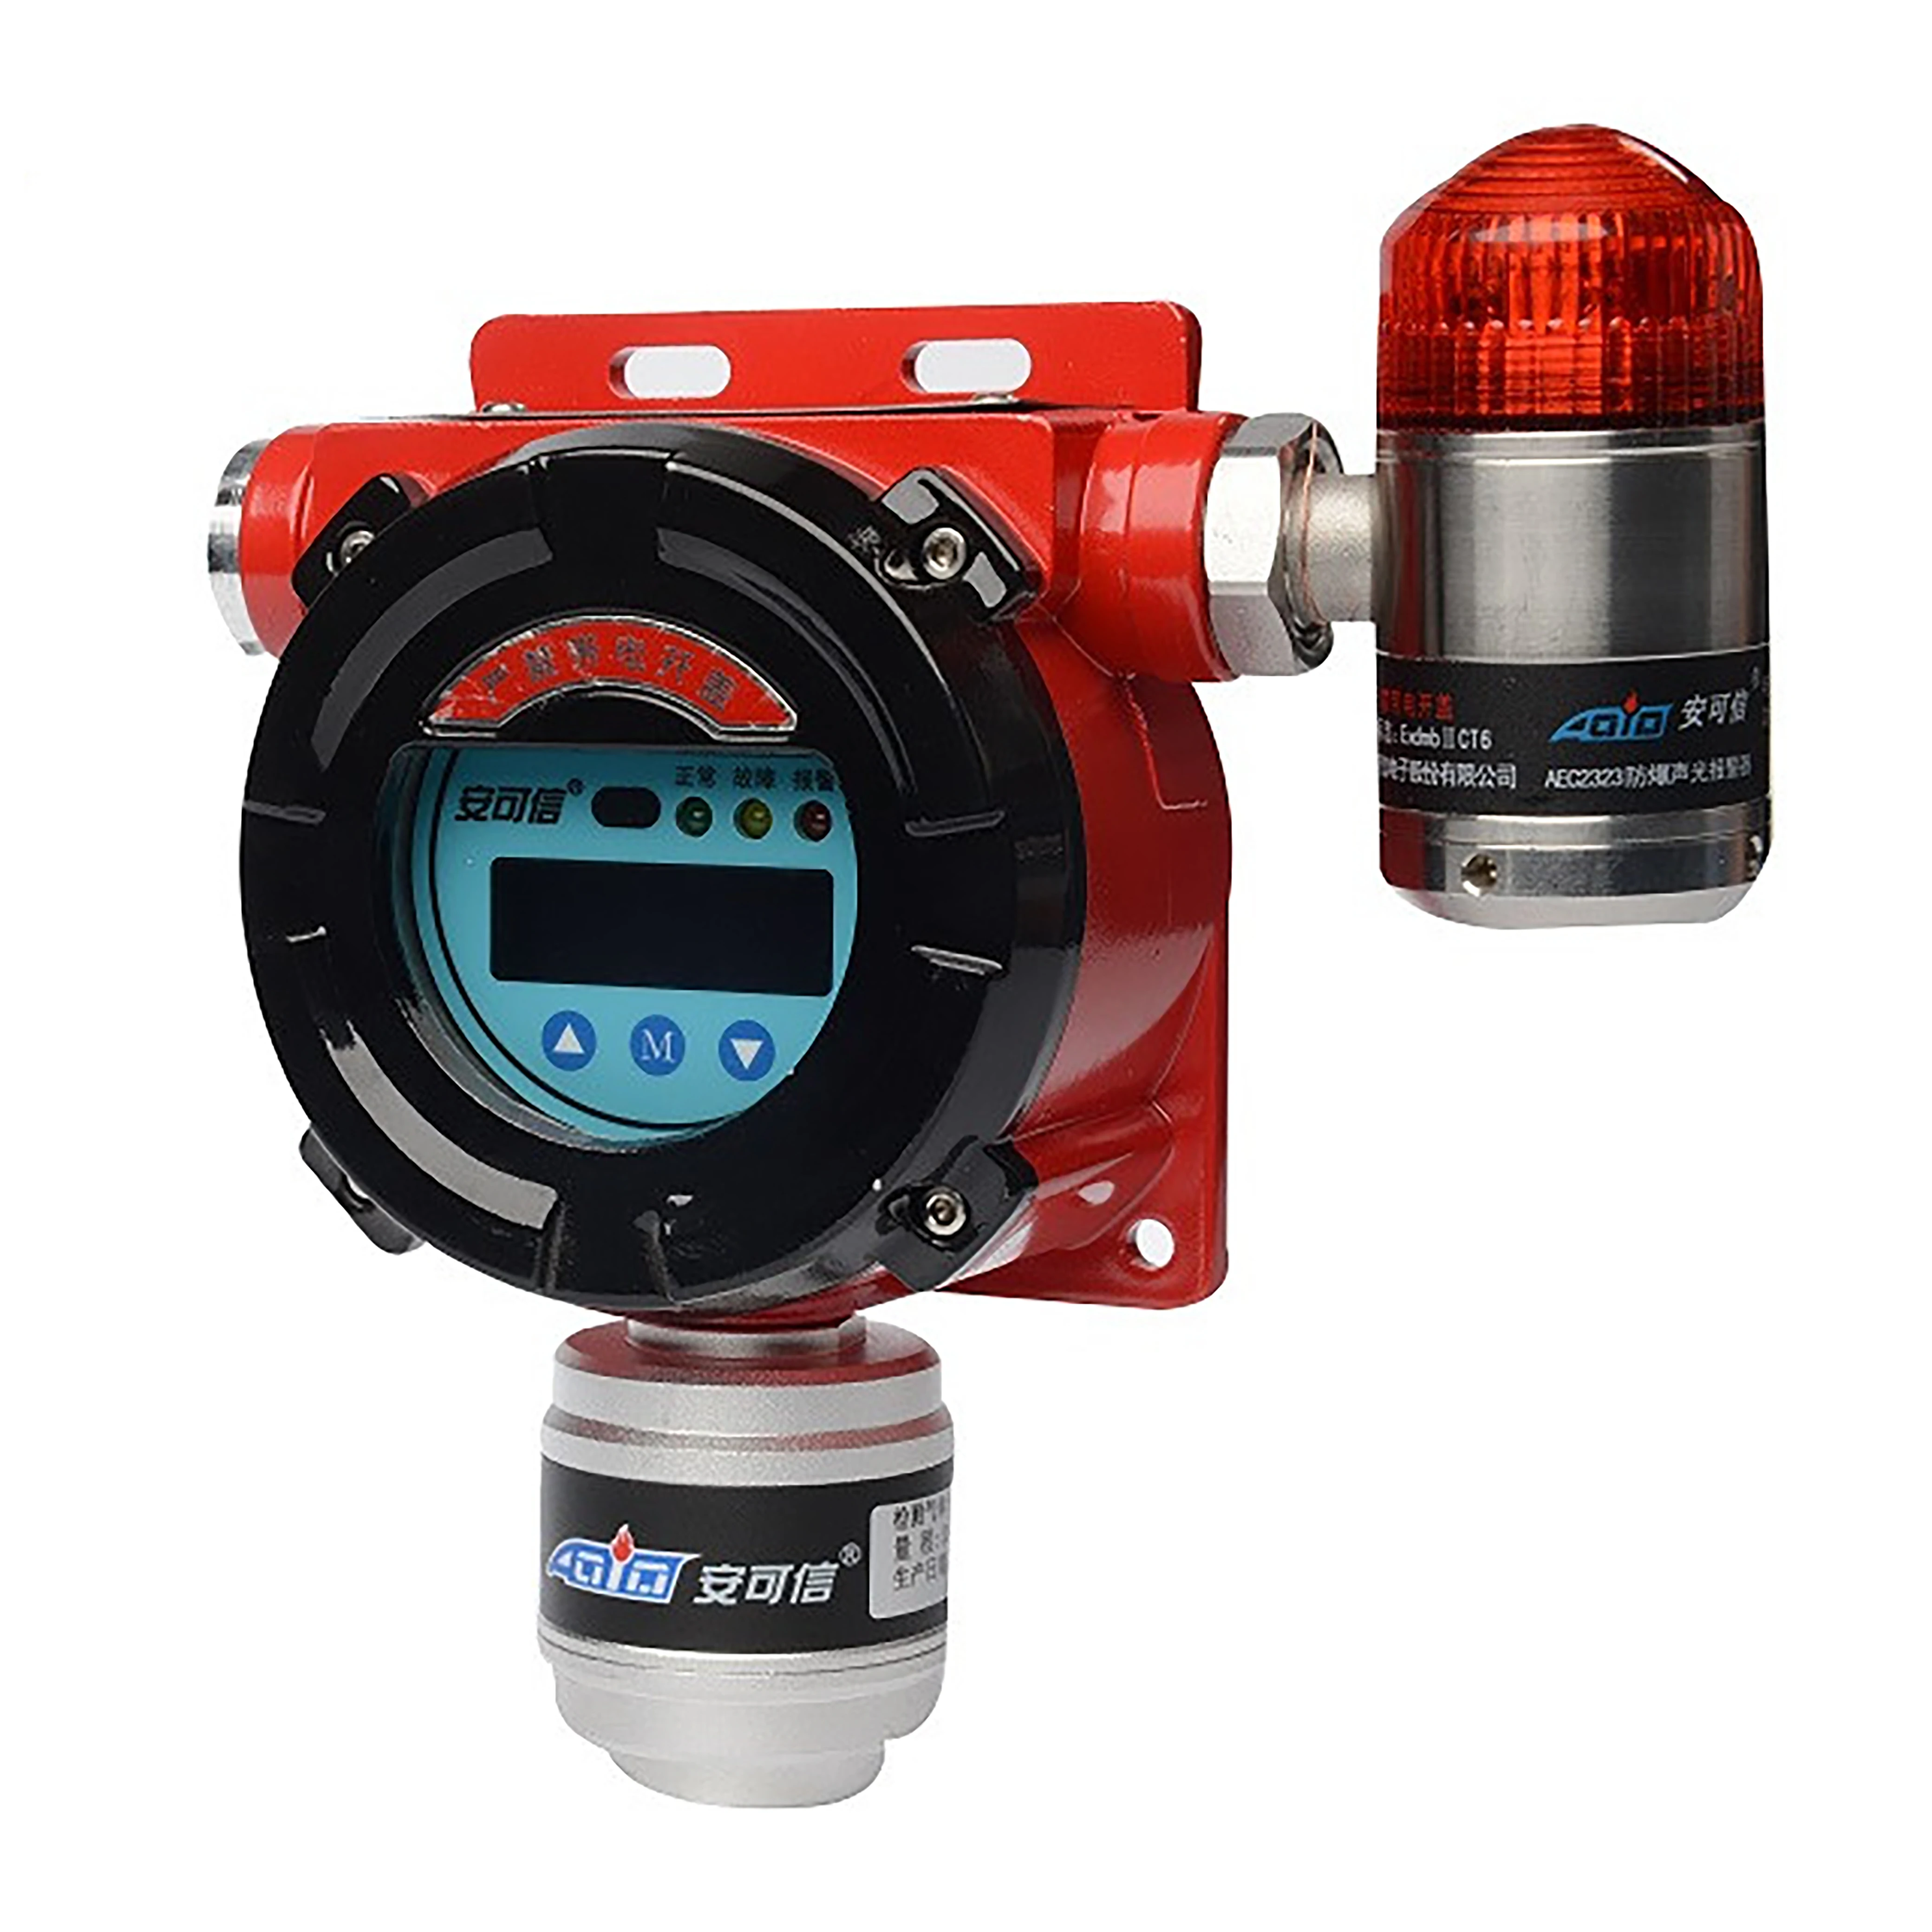 AEC2232bX Combustible Gases and Steam Detector Industrial Fixed Gas Detector Integrated on-site Display Typ